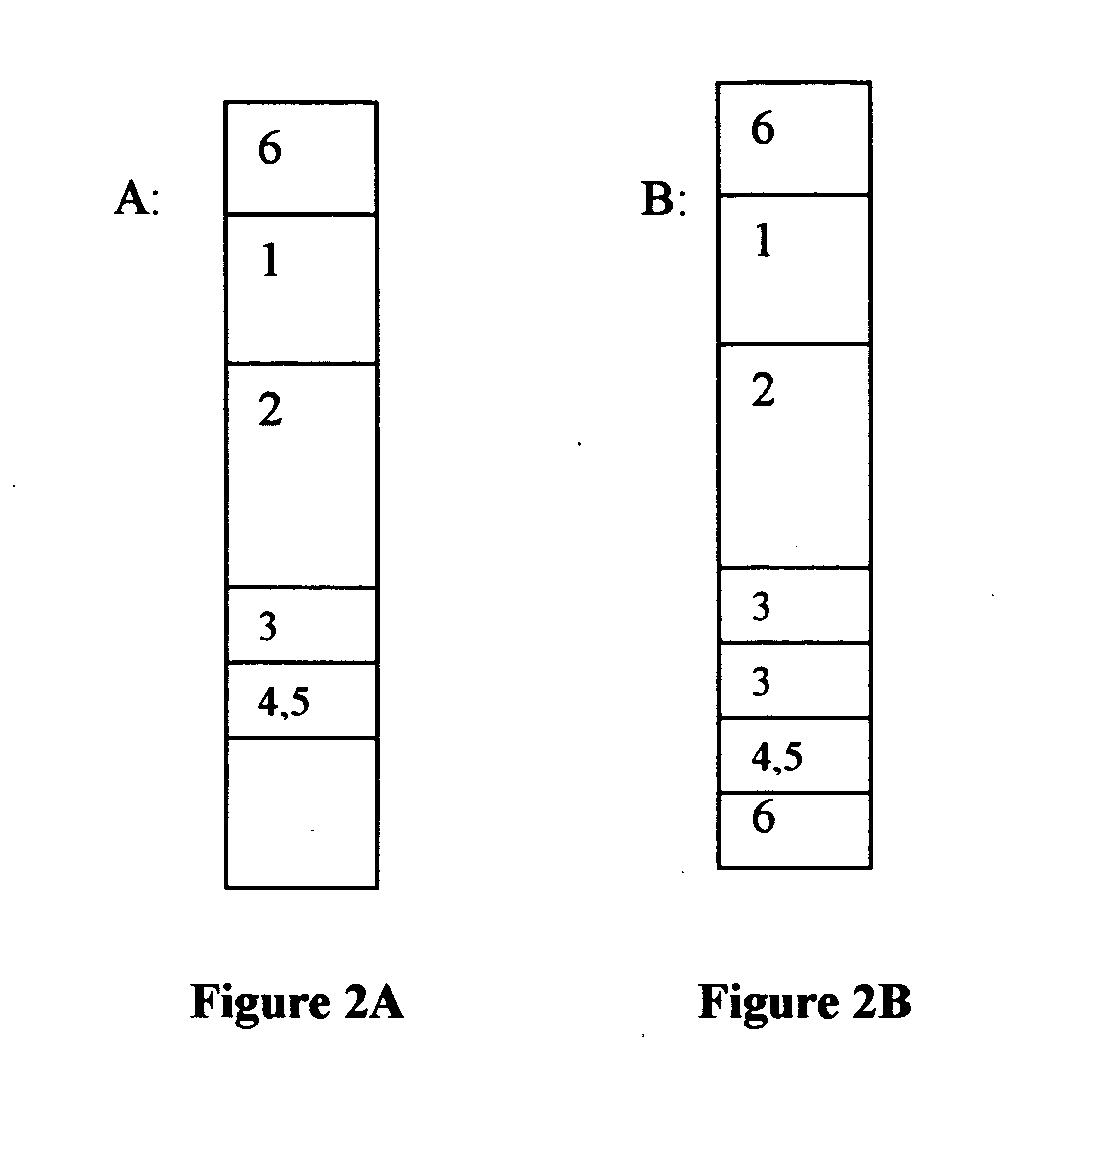 Chromatographic exclusion agglutination assay and methods of use thereof